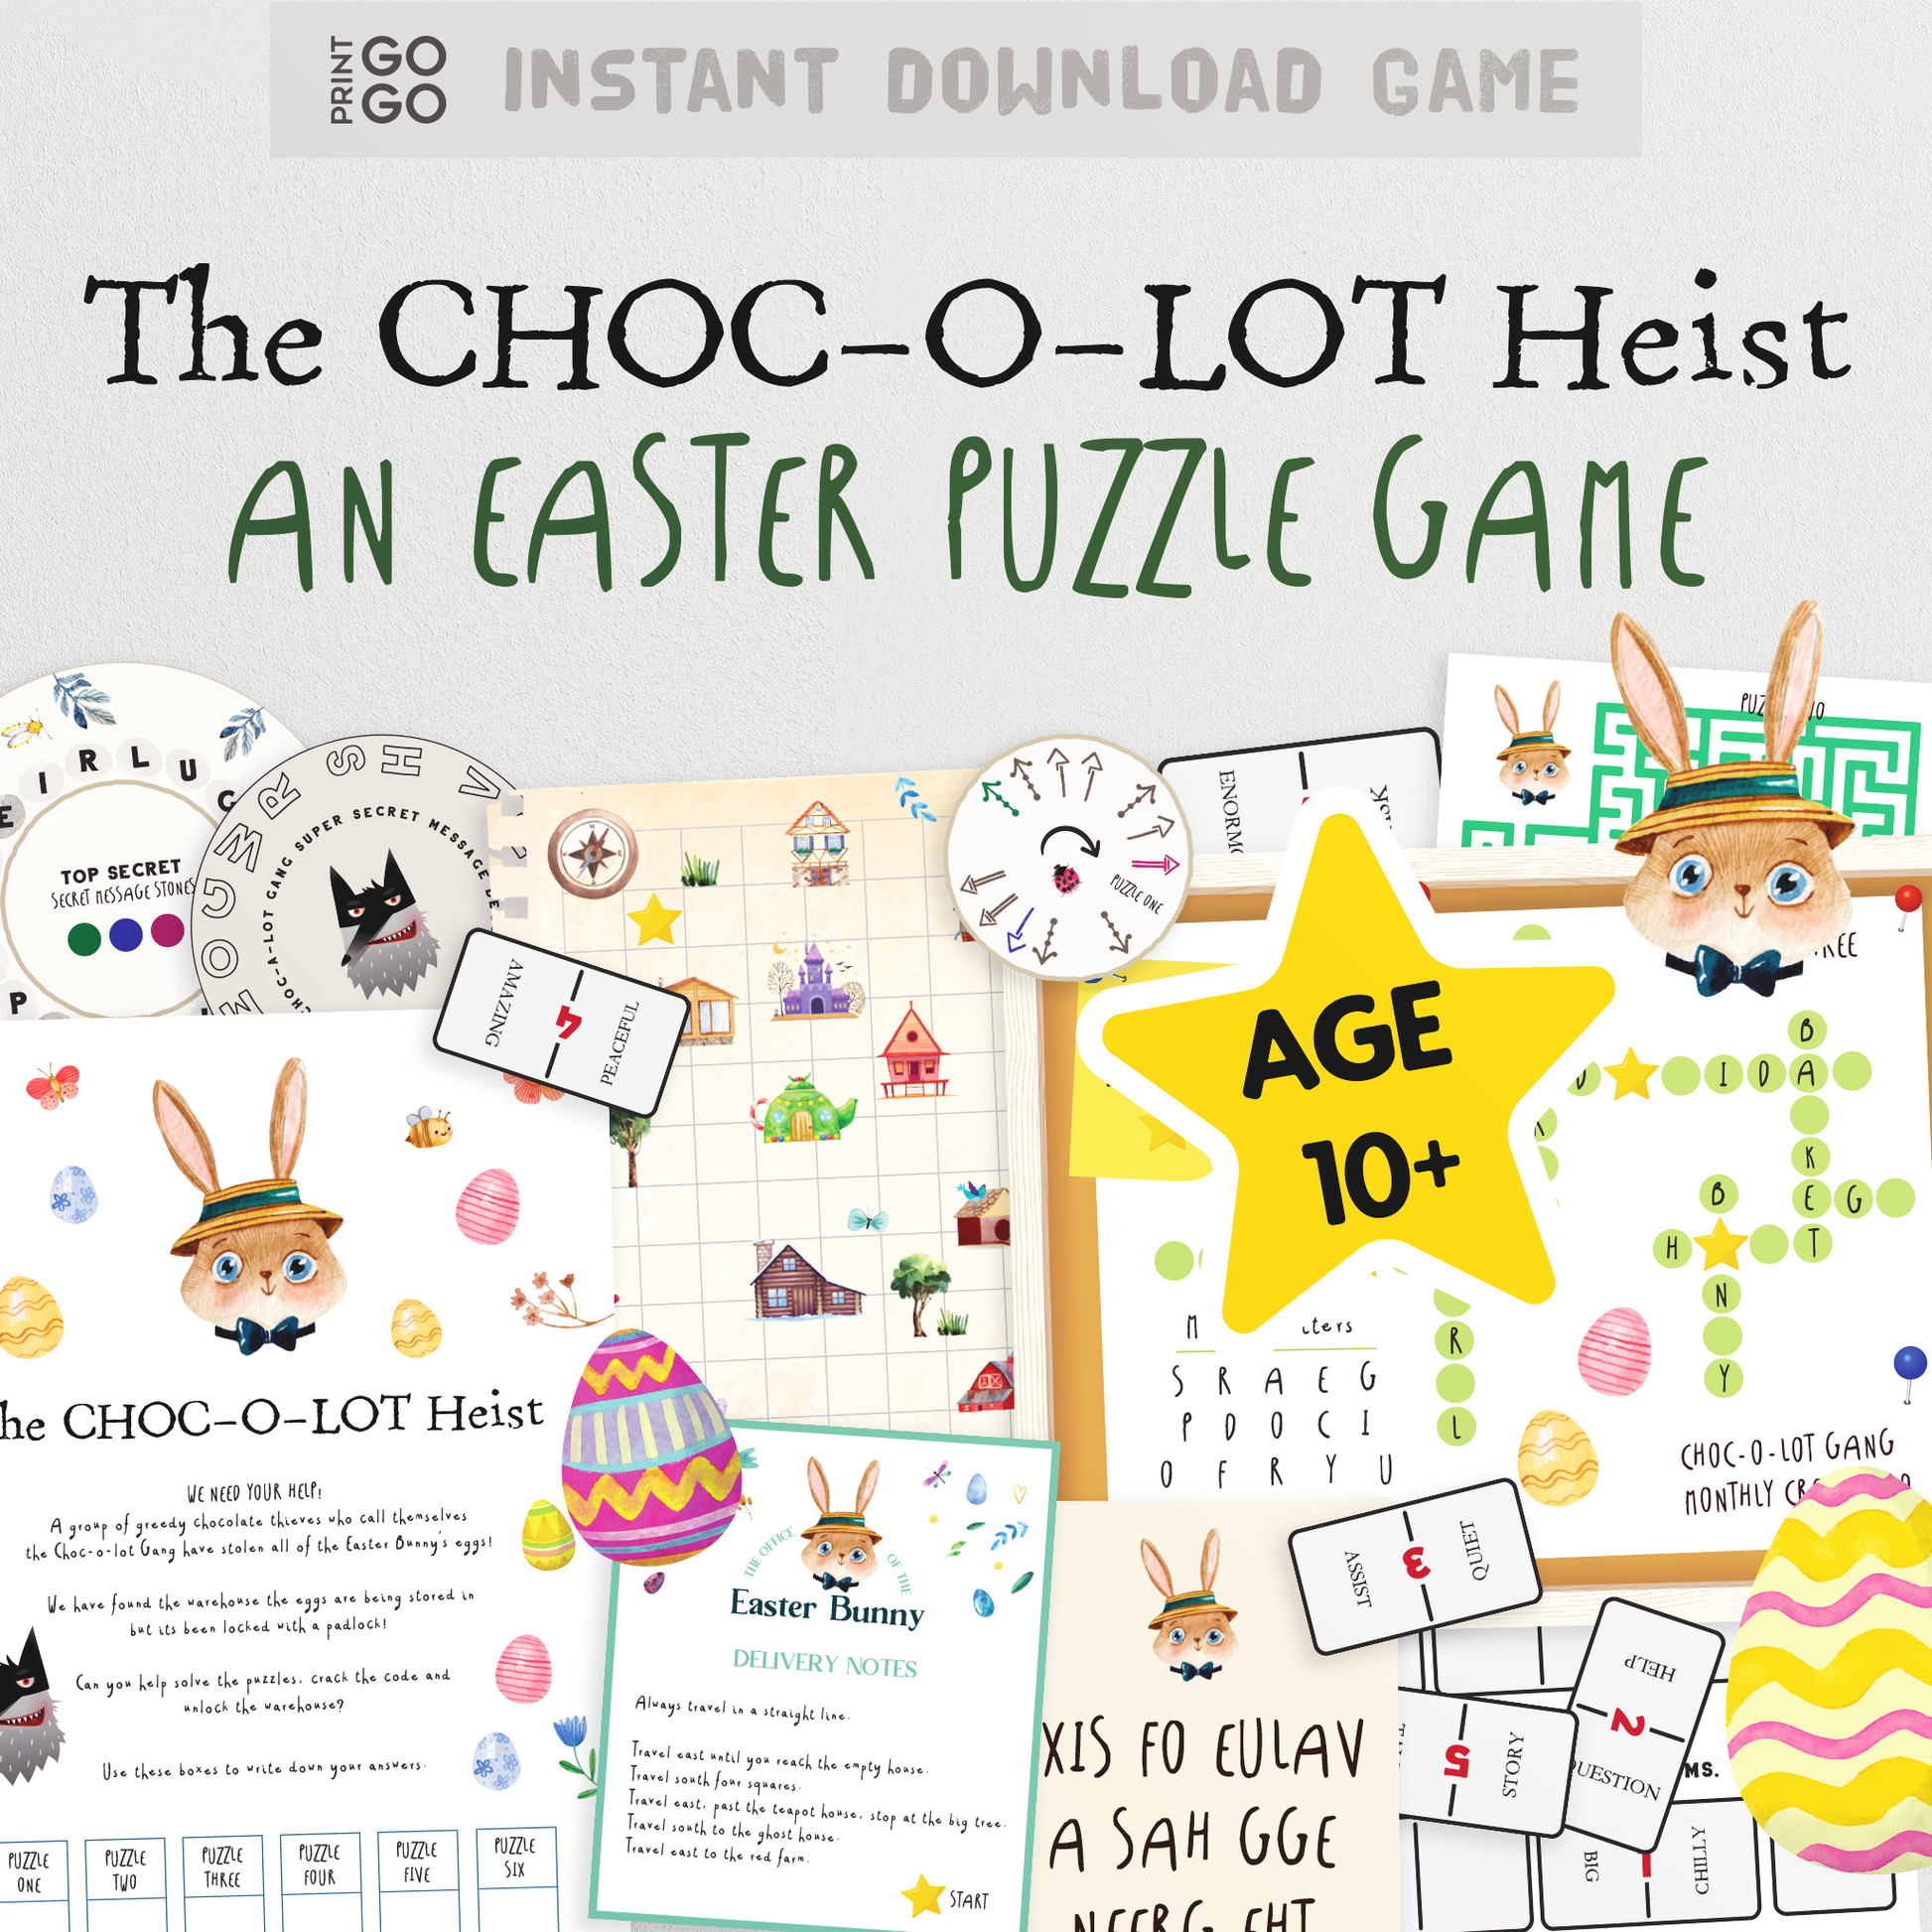 The Choc-o-Lot Heist - An Easter Puzzle Game for Kids